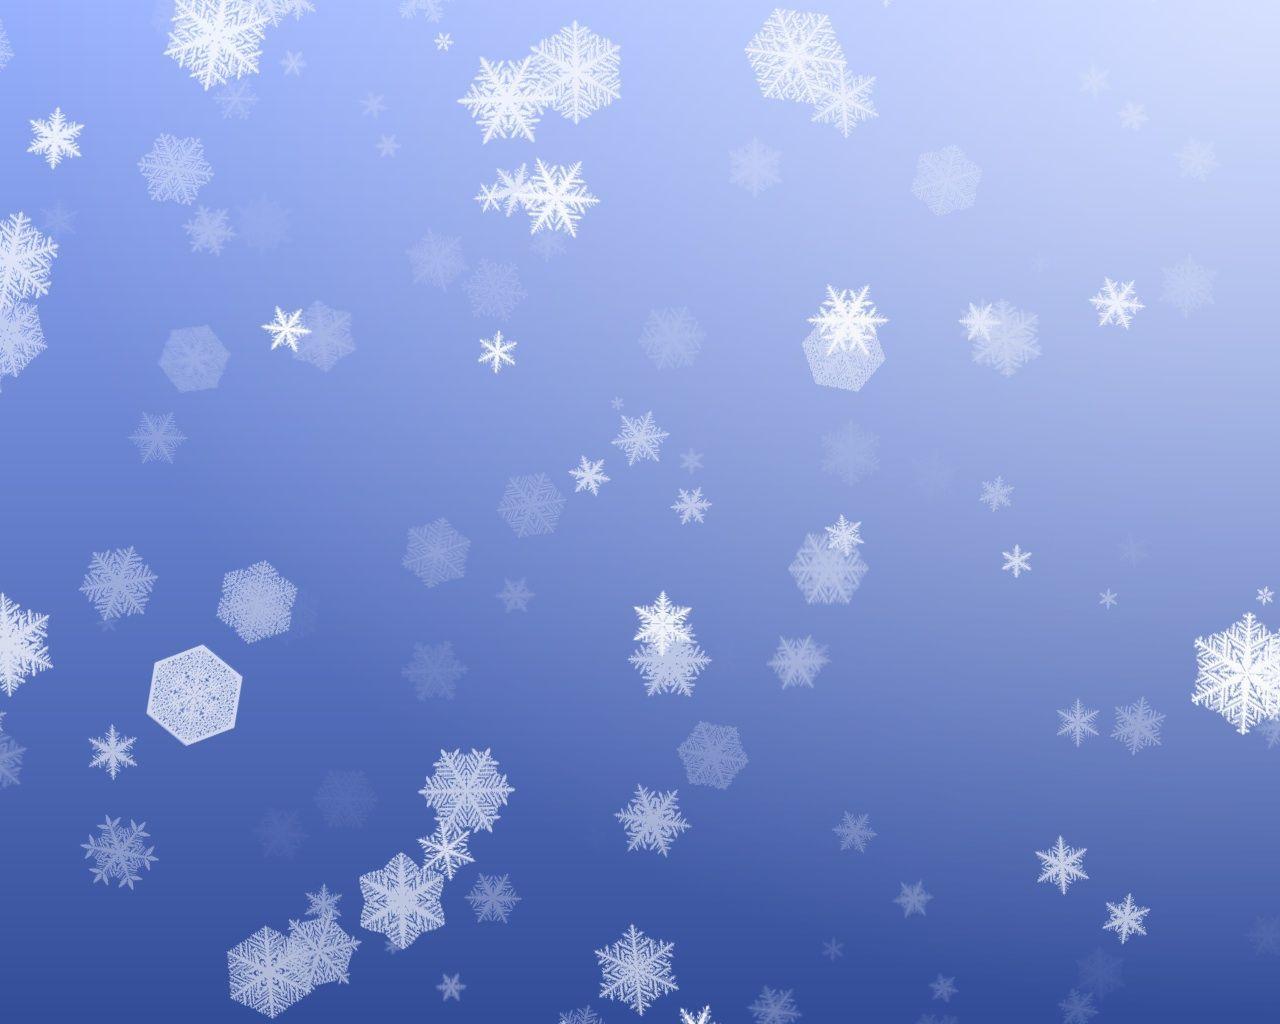 Snow Falling Backgrounds - Wallpaper Cave